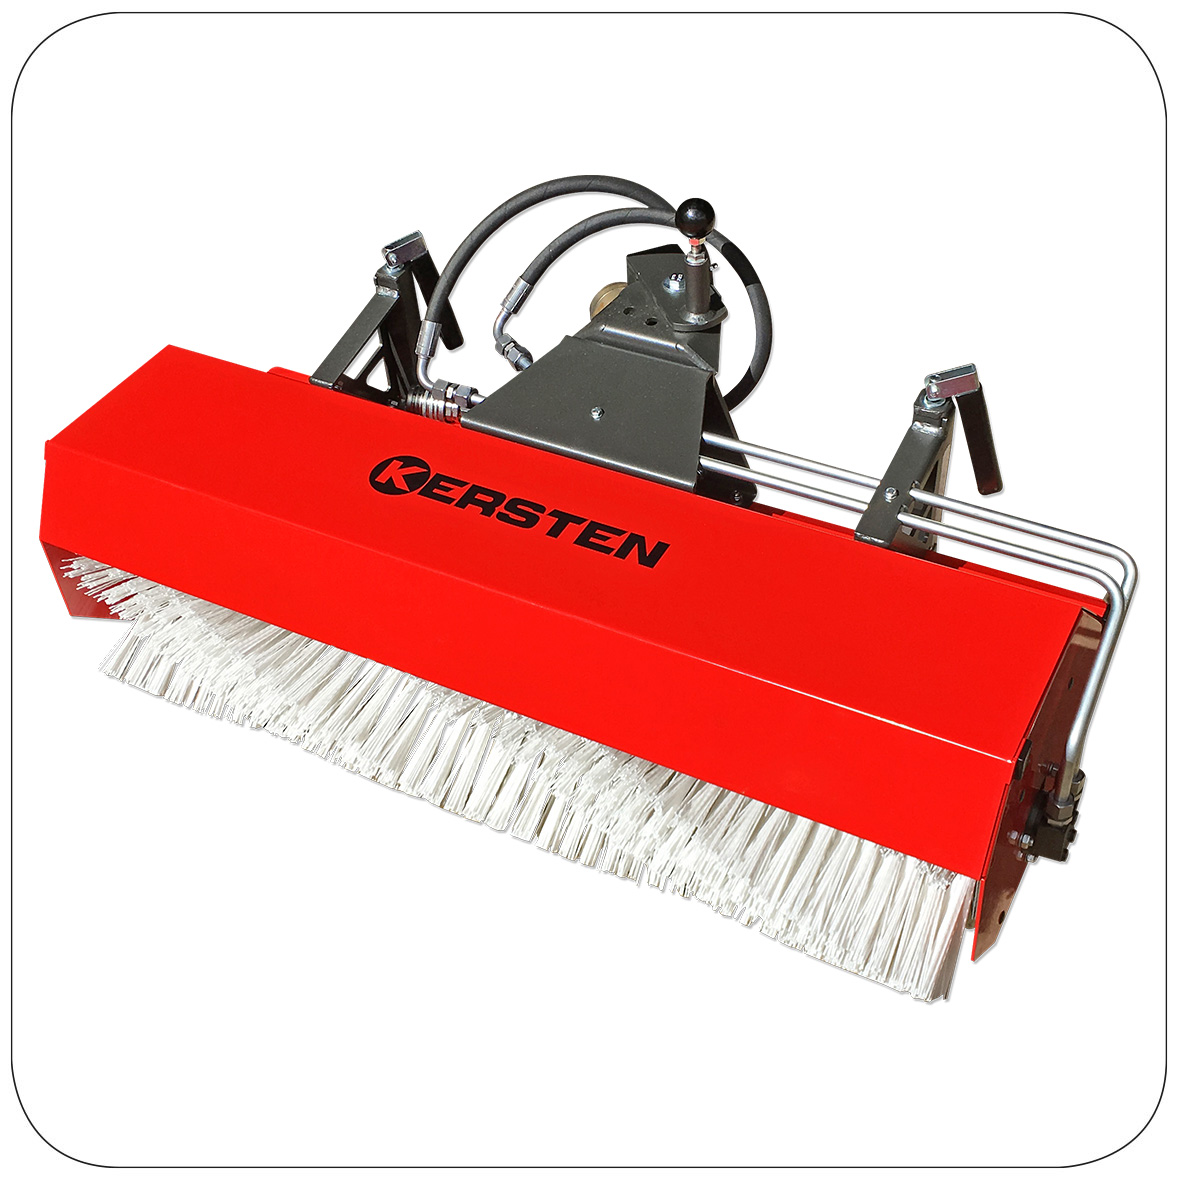 Front Sweeping Machine 90cm H suitable for K1500 and K820/pro range